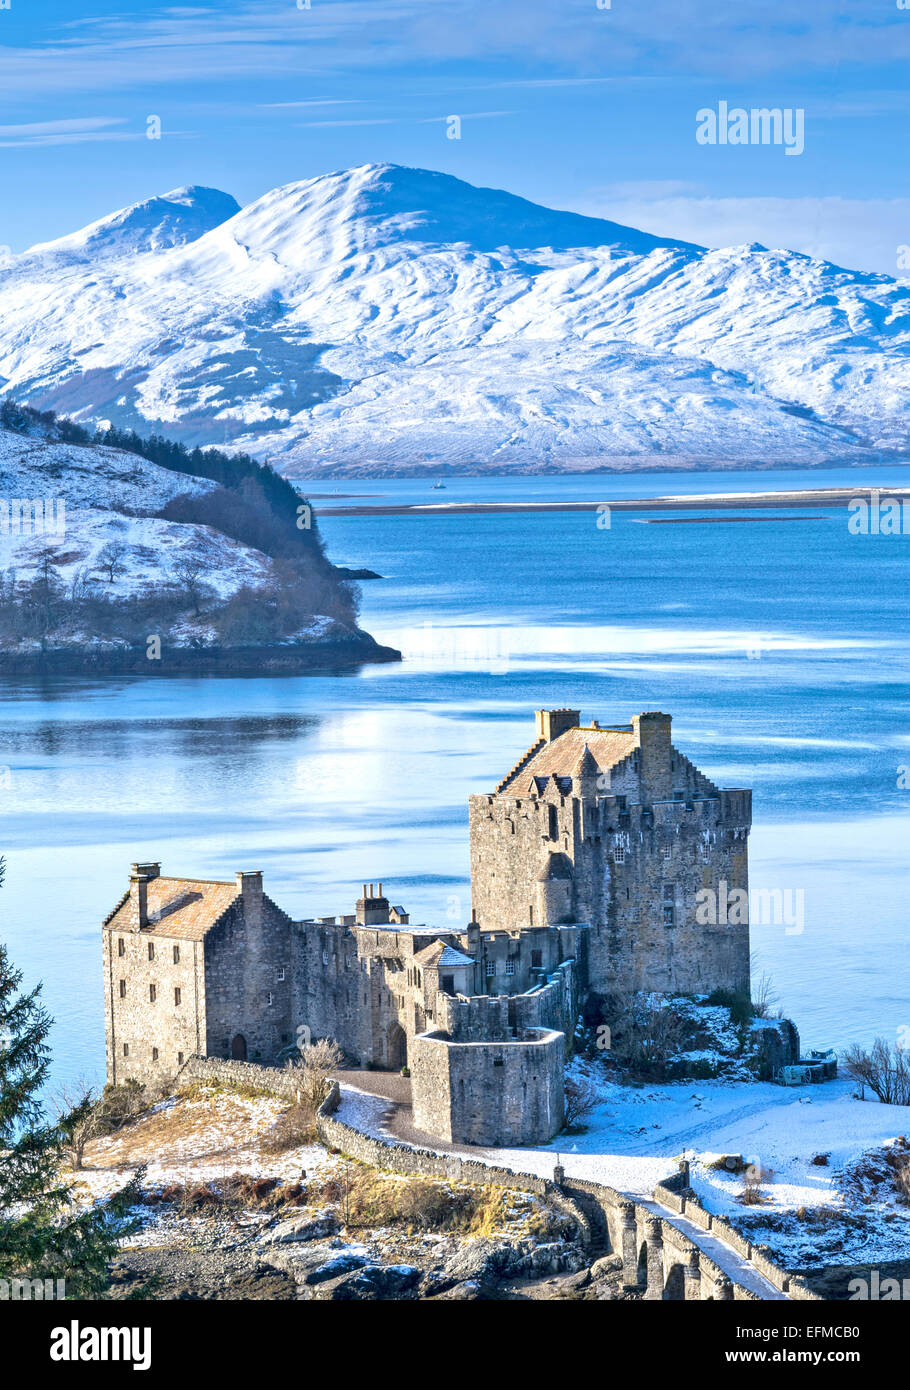 EILEAN DONAN CASTLE IN WNTER WITH A BLUE LOCH DUICH AND HEAVY SNOW ON THE MOUNTAINS Stock Photo